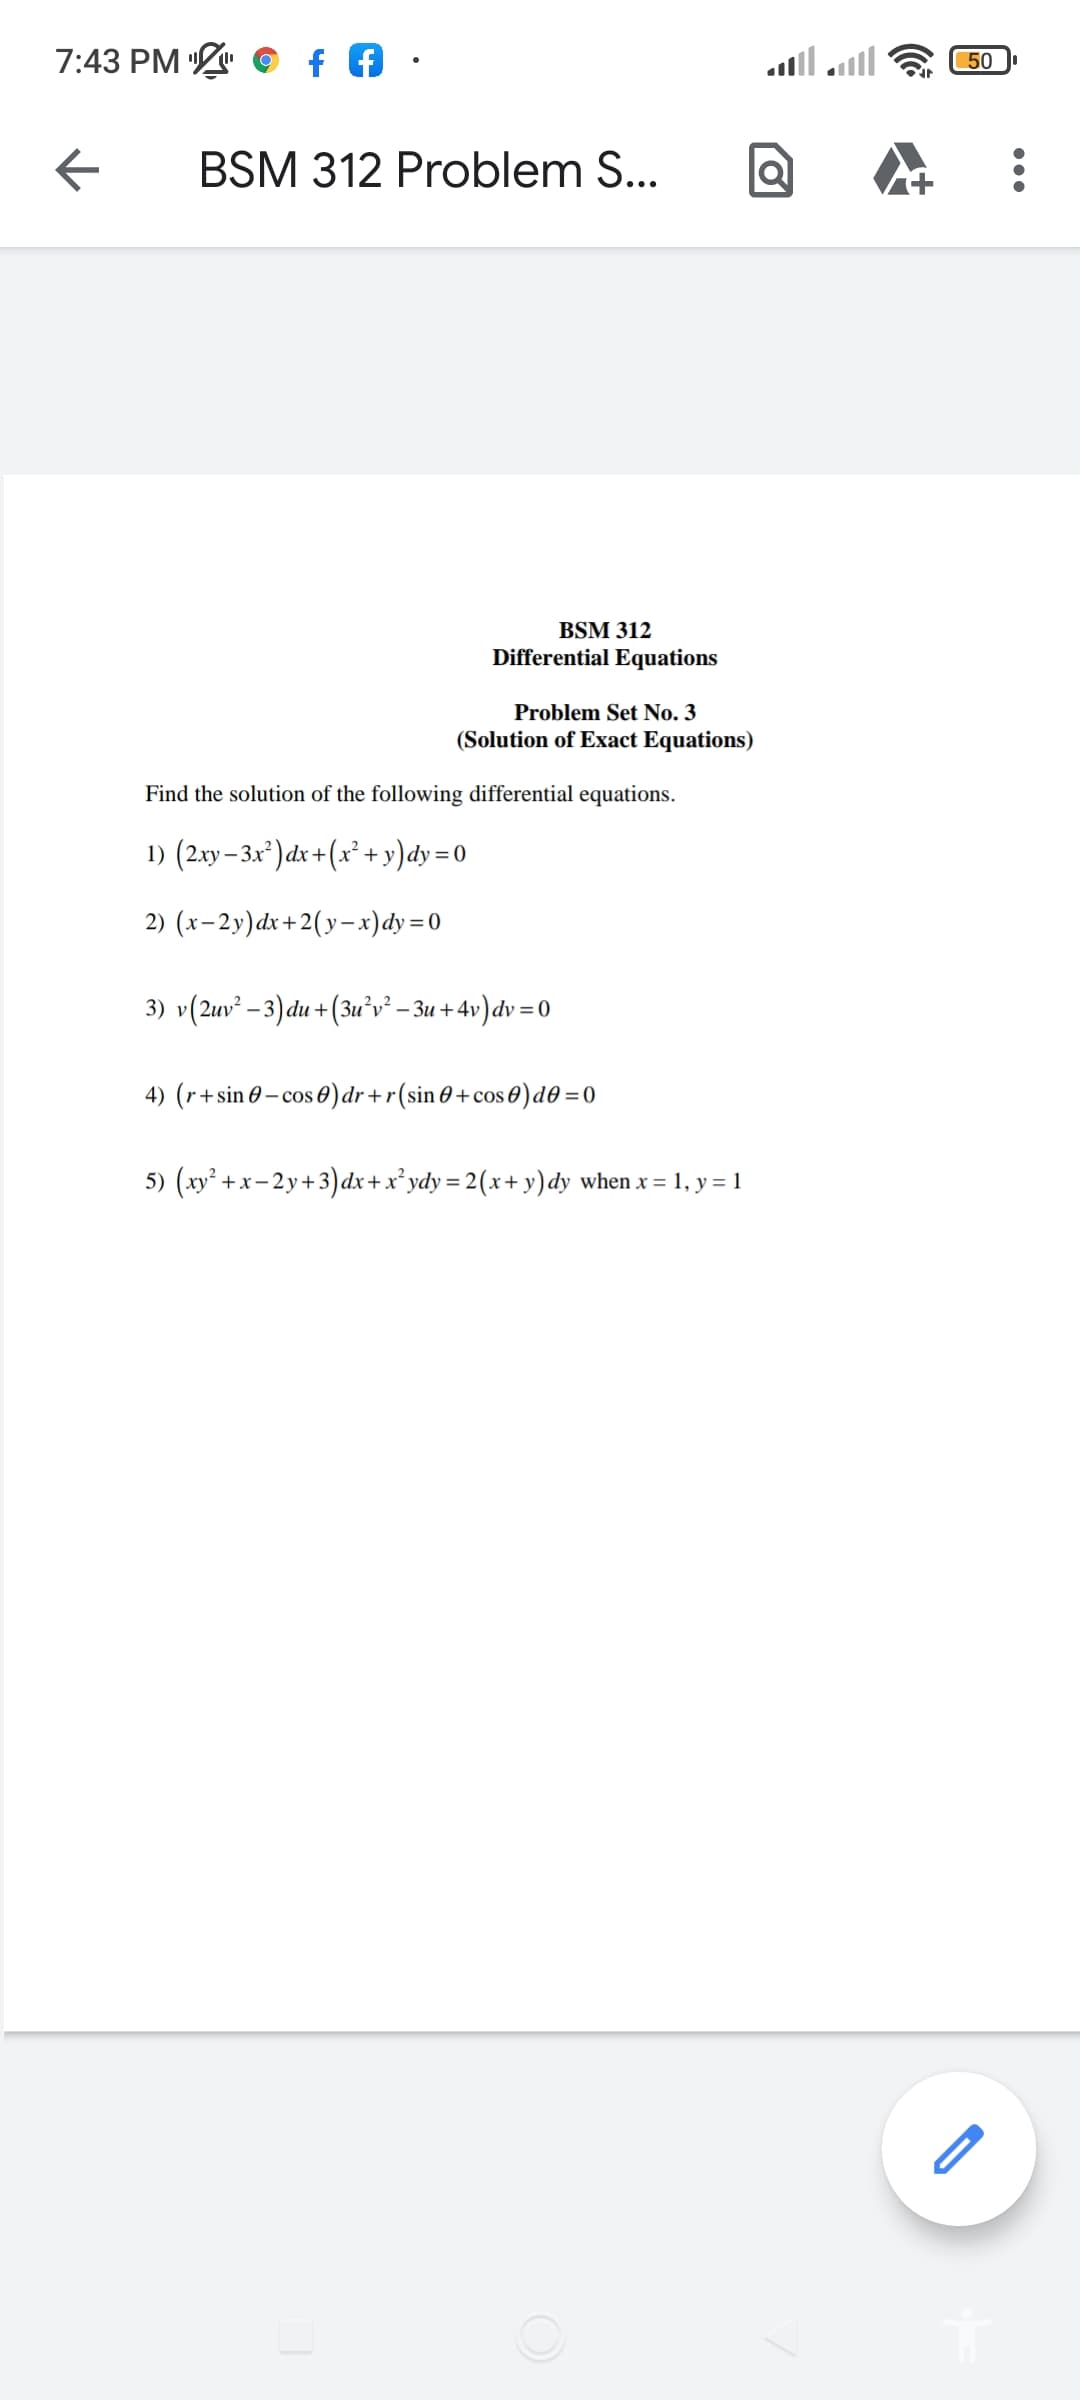 7:43 PM
50
BSM 312 Problem S...
BSM 312
Differential Equations
Problem Set No. 3
(Solution of Exact Equations)
Find the solution of the following differential equations.
1) (2.xy– 3x* ) dx +(x² + y)dy=0
2) (x-2y)dx+2(y-x)dy =0
3) v(2uv² – 3) du +(3u°v² – 3u +4v)dv = 0
4) (r+sin 0 – cos 0)dr+r(sin 0 +cos 0)d0 =0
5) (xy² +x- 2y+3)dx+x² ydy= 2(x+ y)dy when x = 1, y = 1
